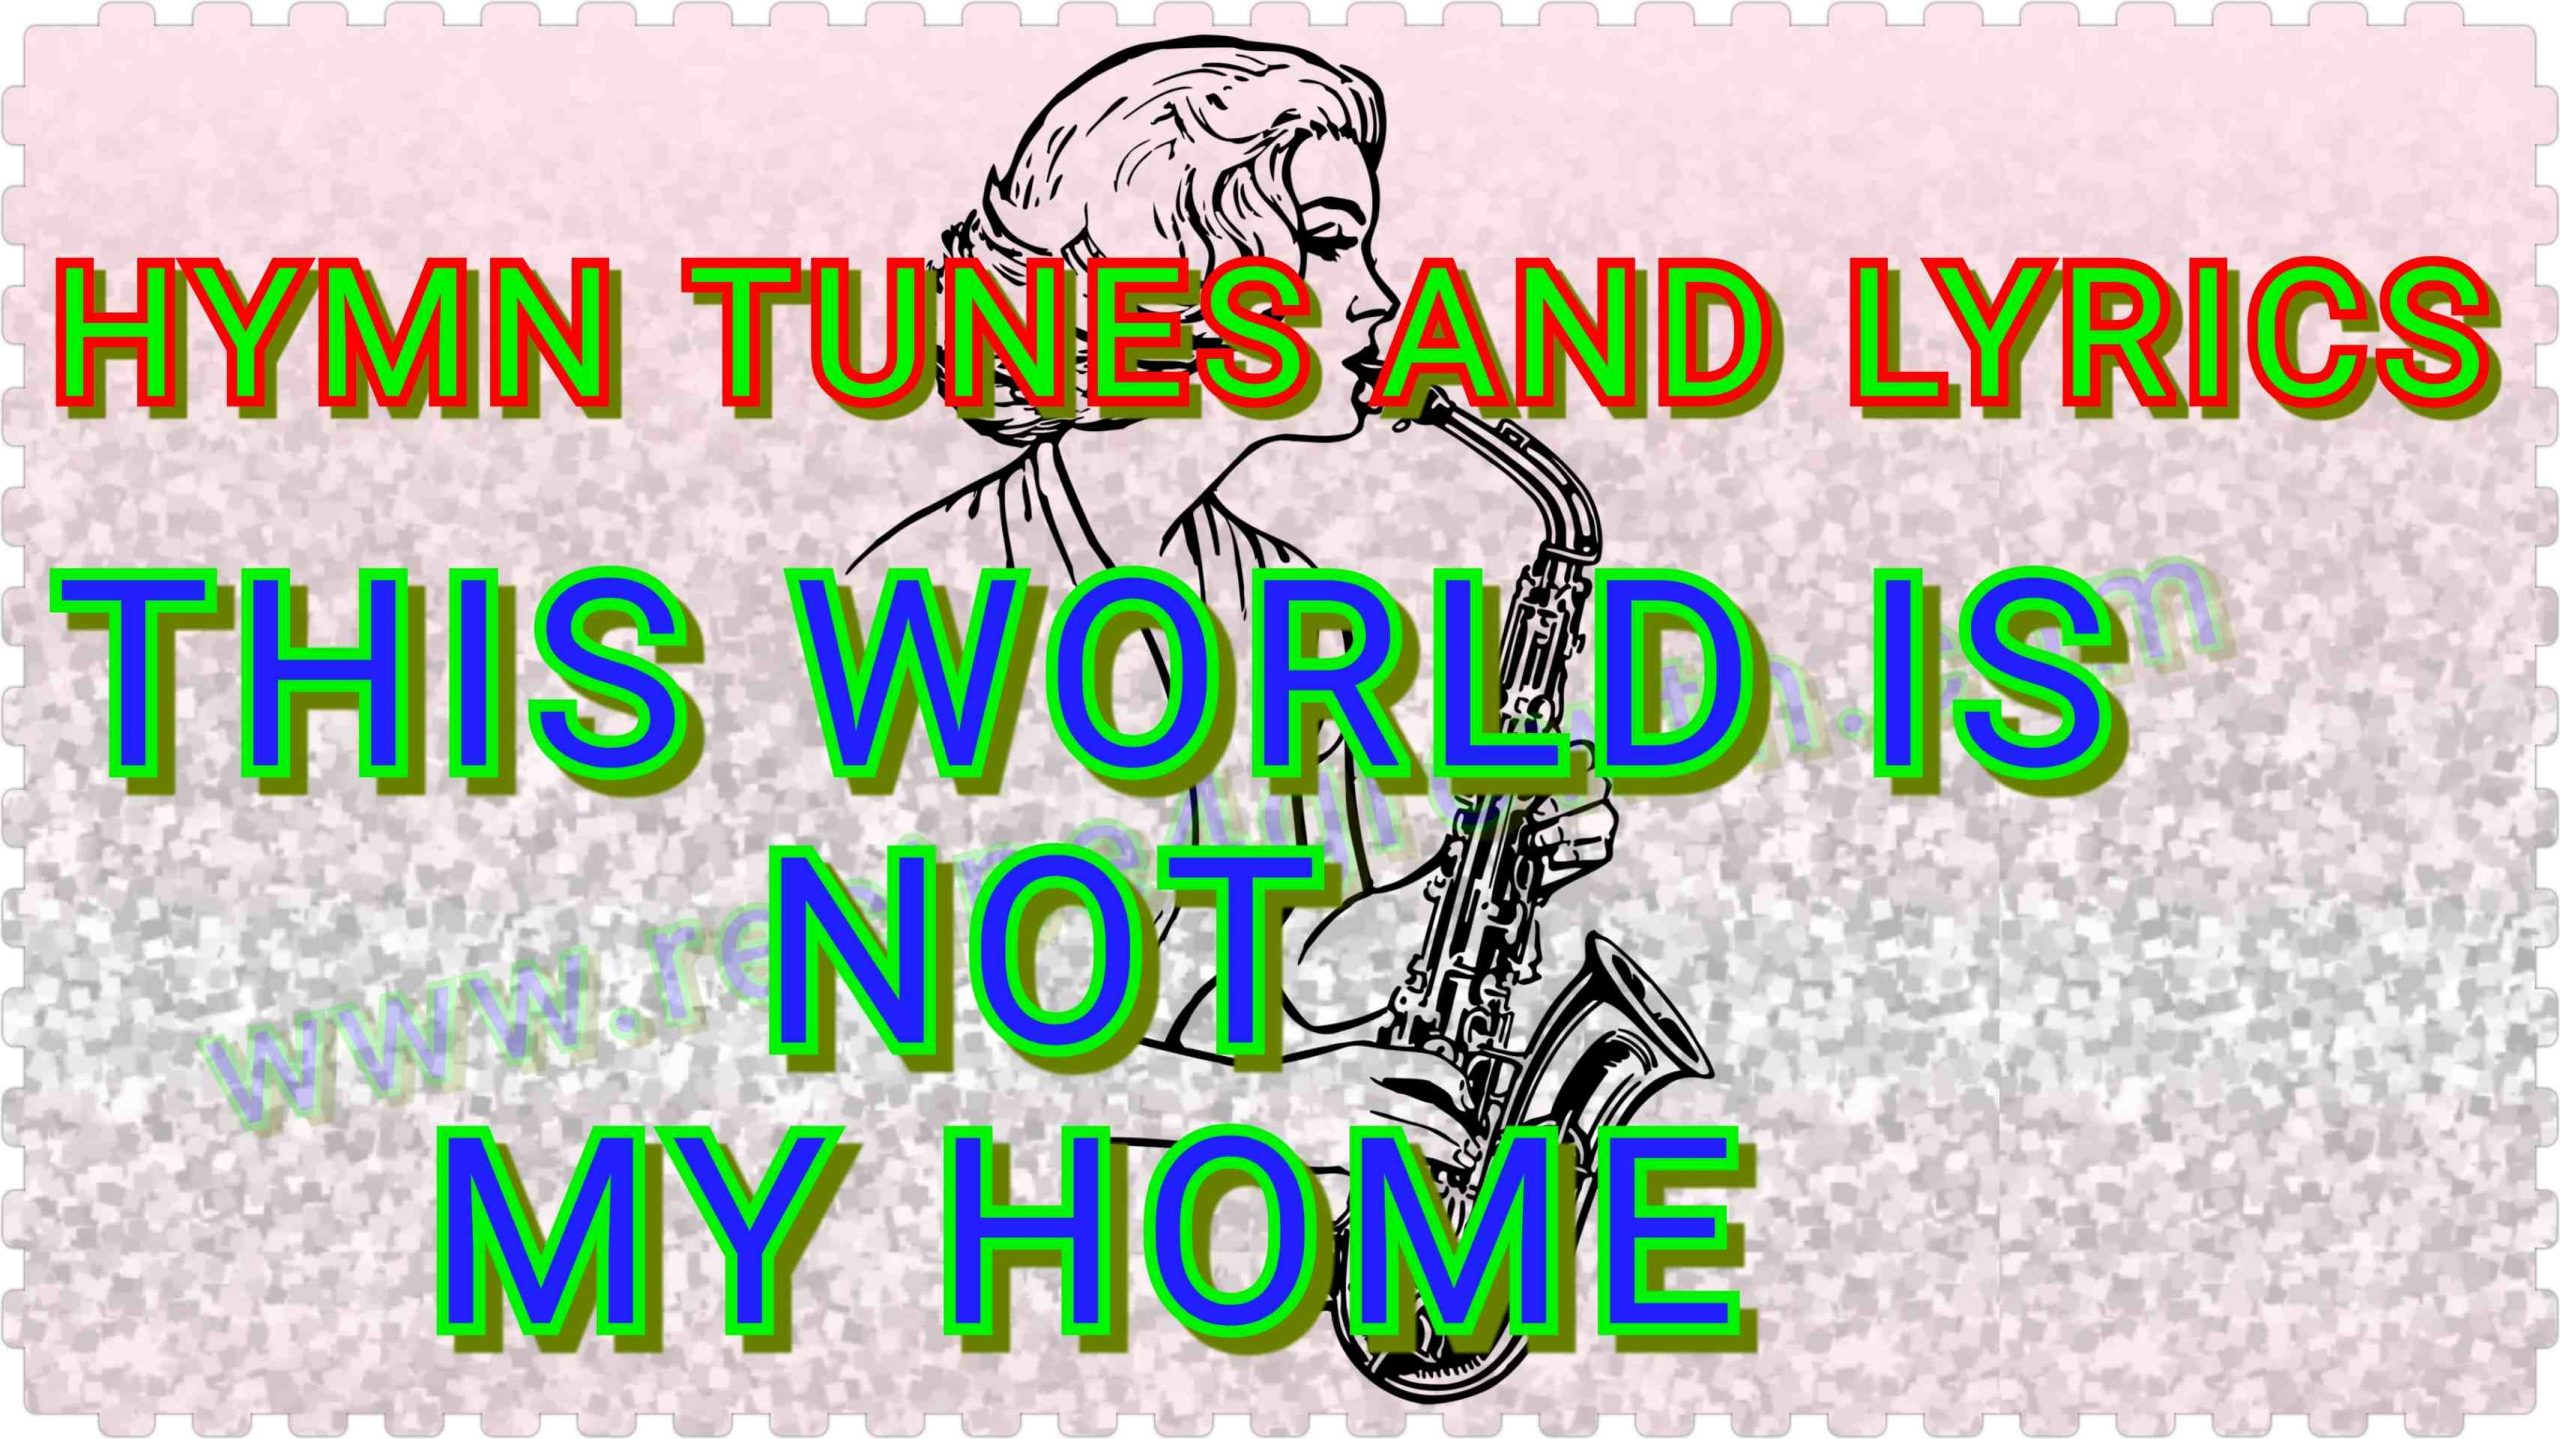 THIS WORLD IS NOT MY HOME